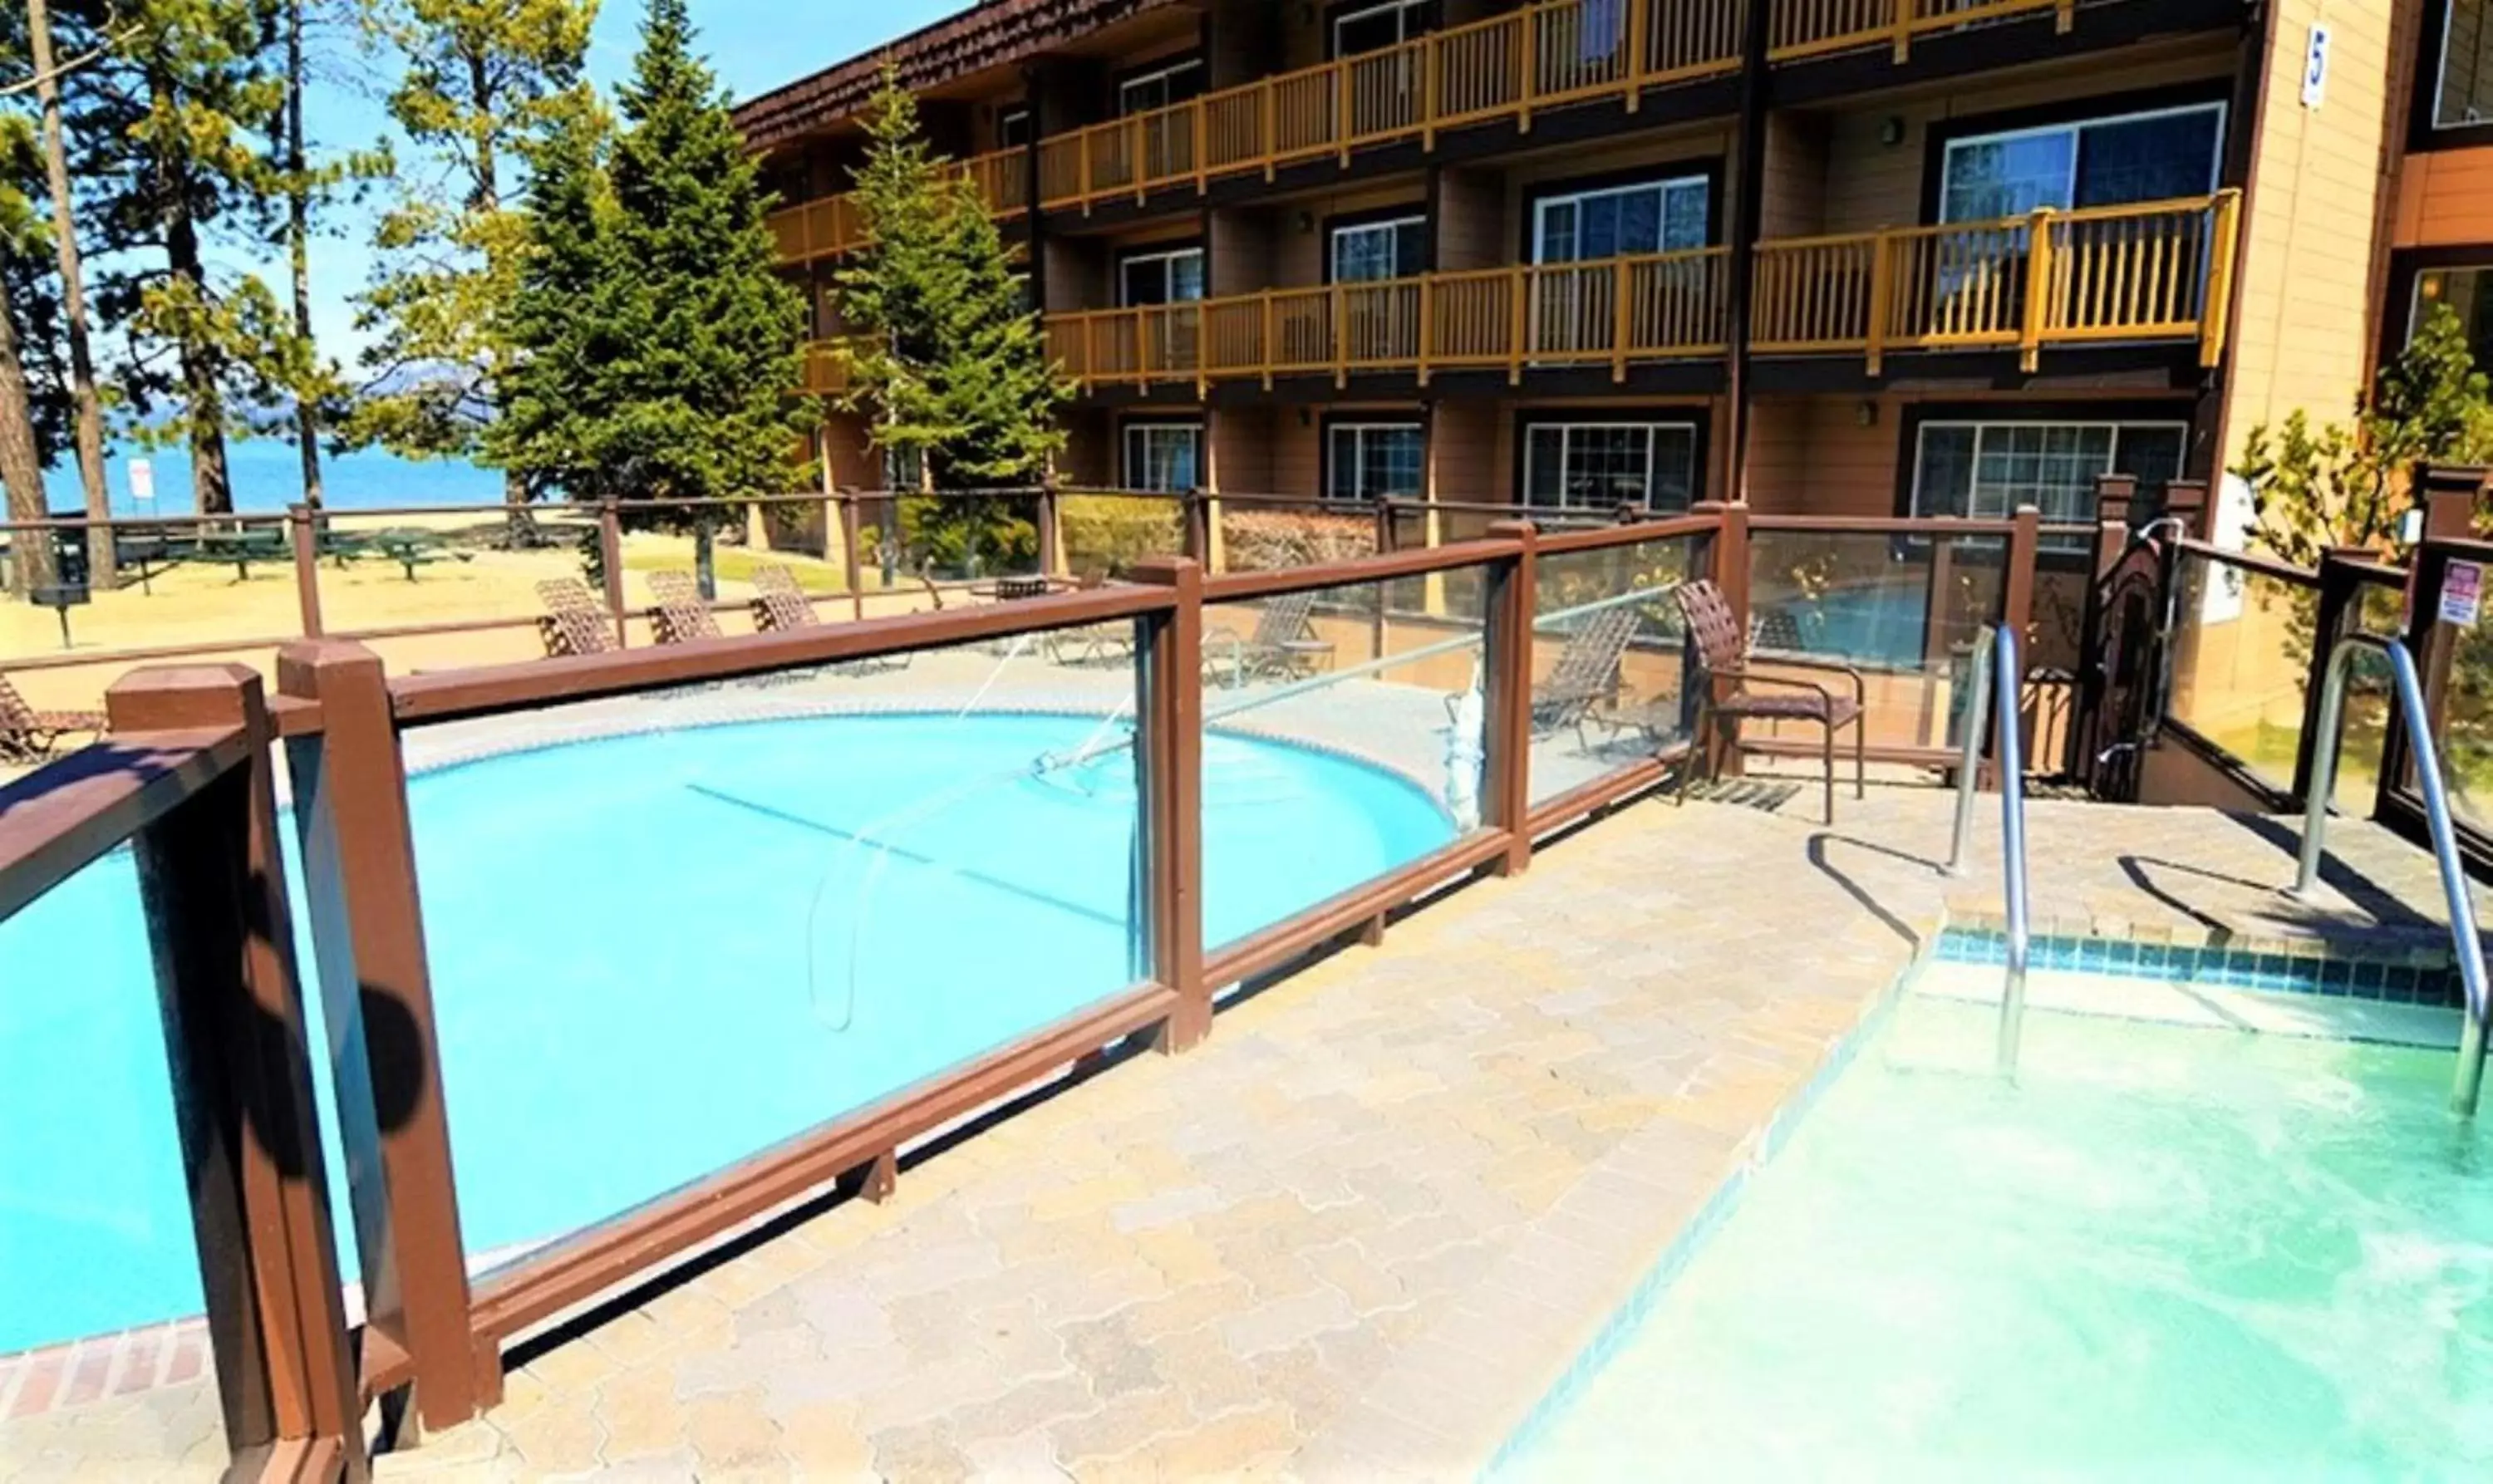 Property building, Swimming Pool in The Tahoe Beach & Ski Club Owners Association